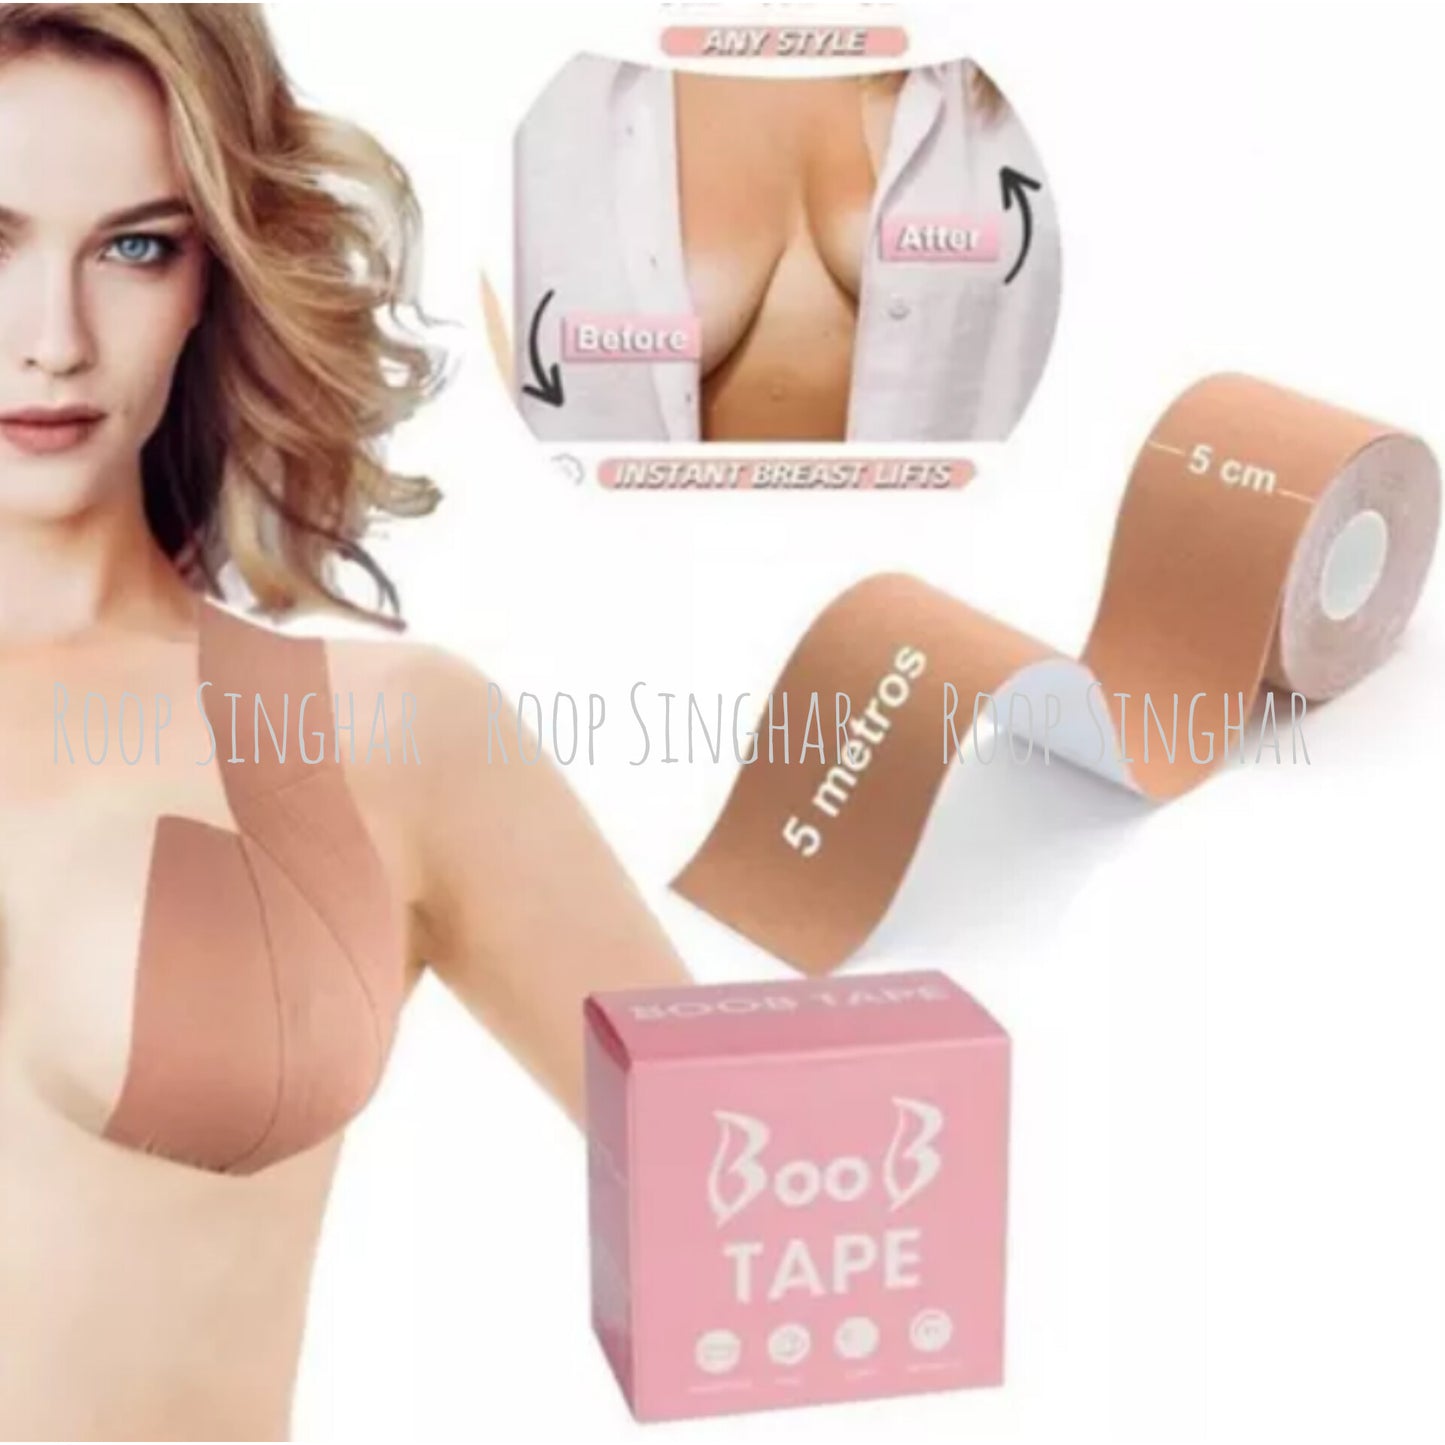 BOOB TAPE                                                      Ready for your Breast Lift?.....